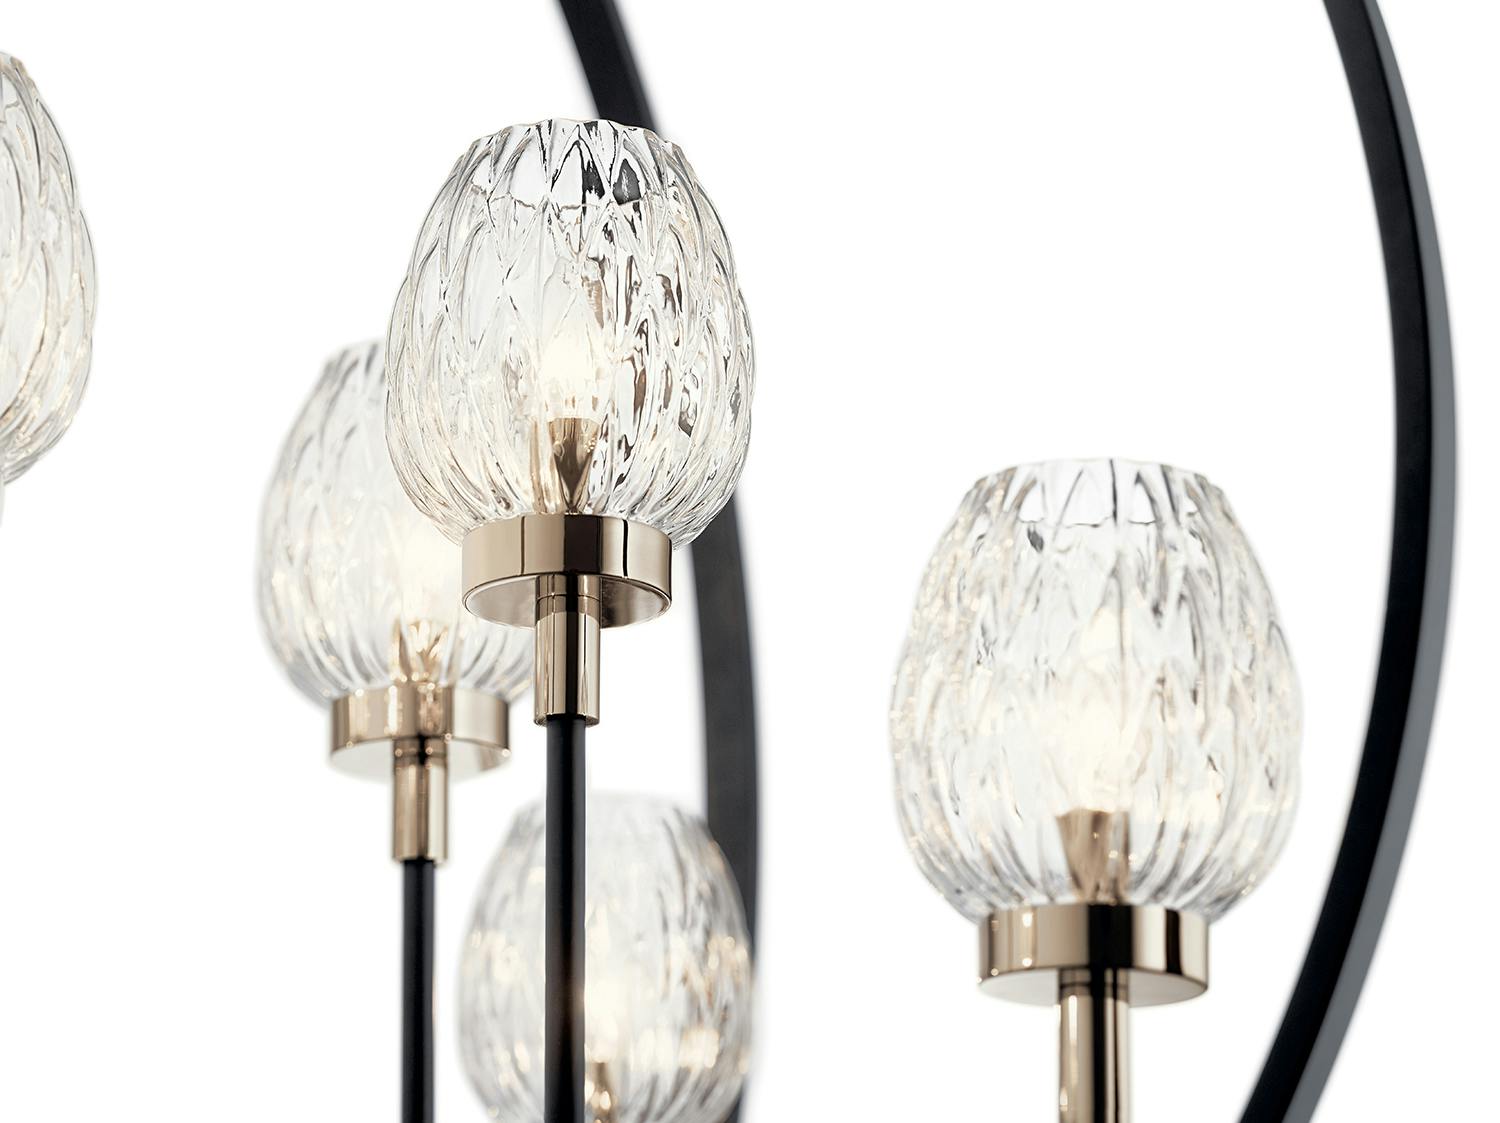 Close up view of the Moyra 8 Light Chandelier in Black on a white background